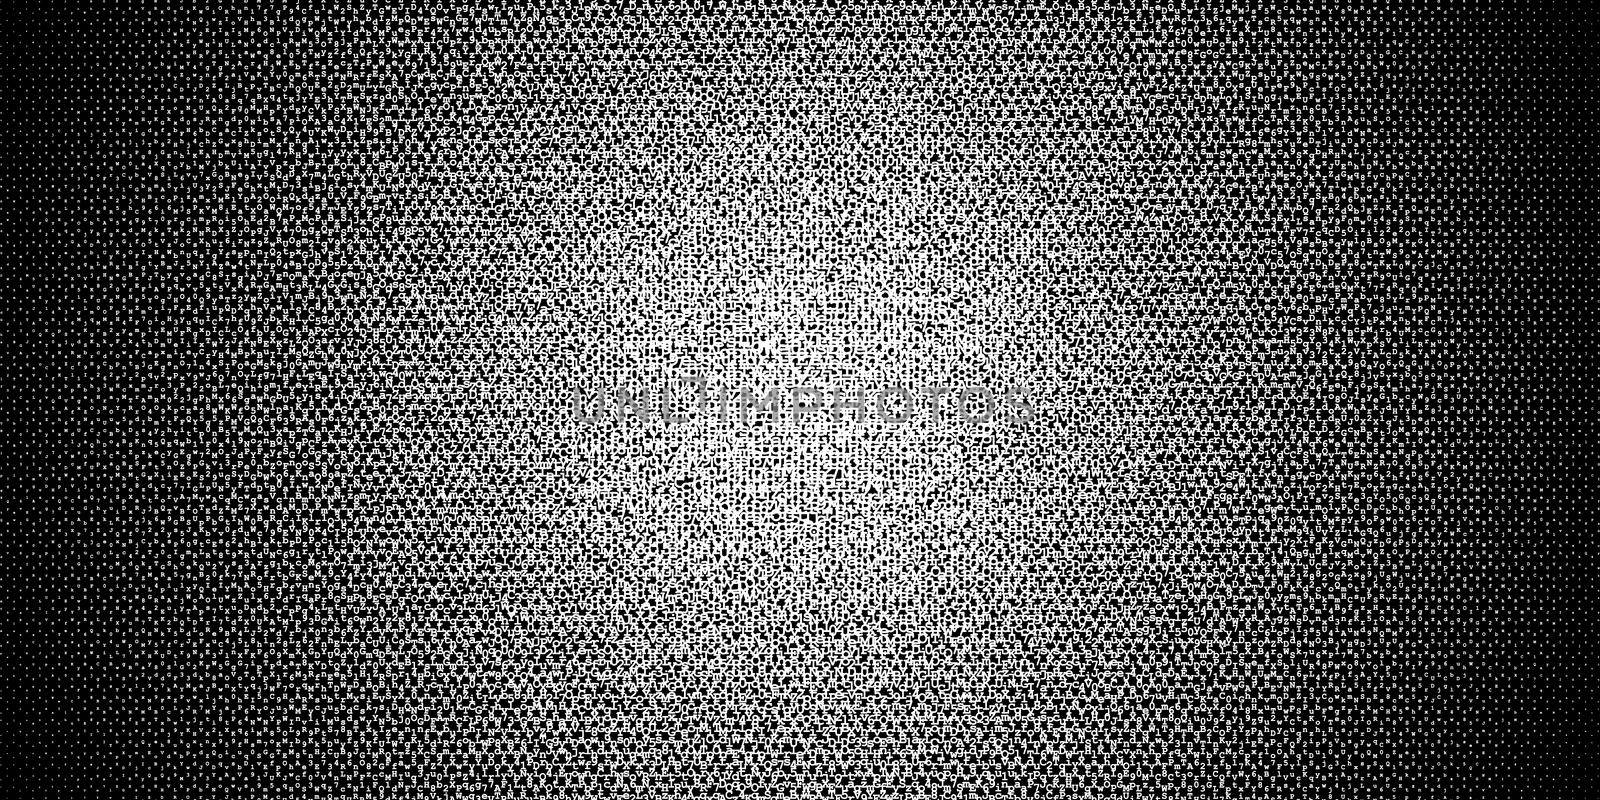 Halftone gradient made of white letters and digits randomly distributed on black background, abstract illustration